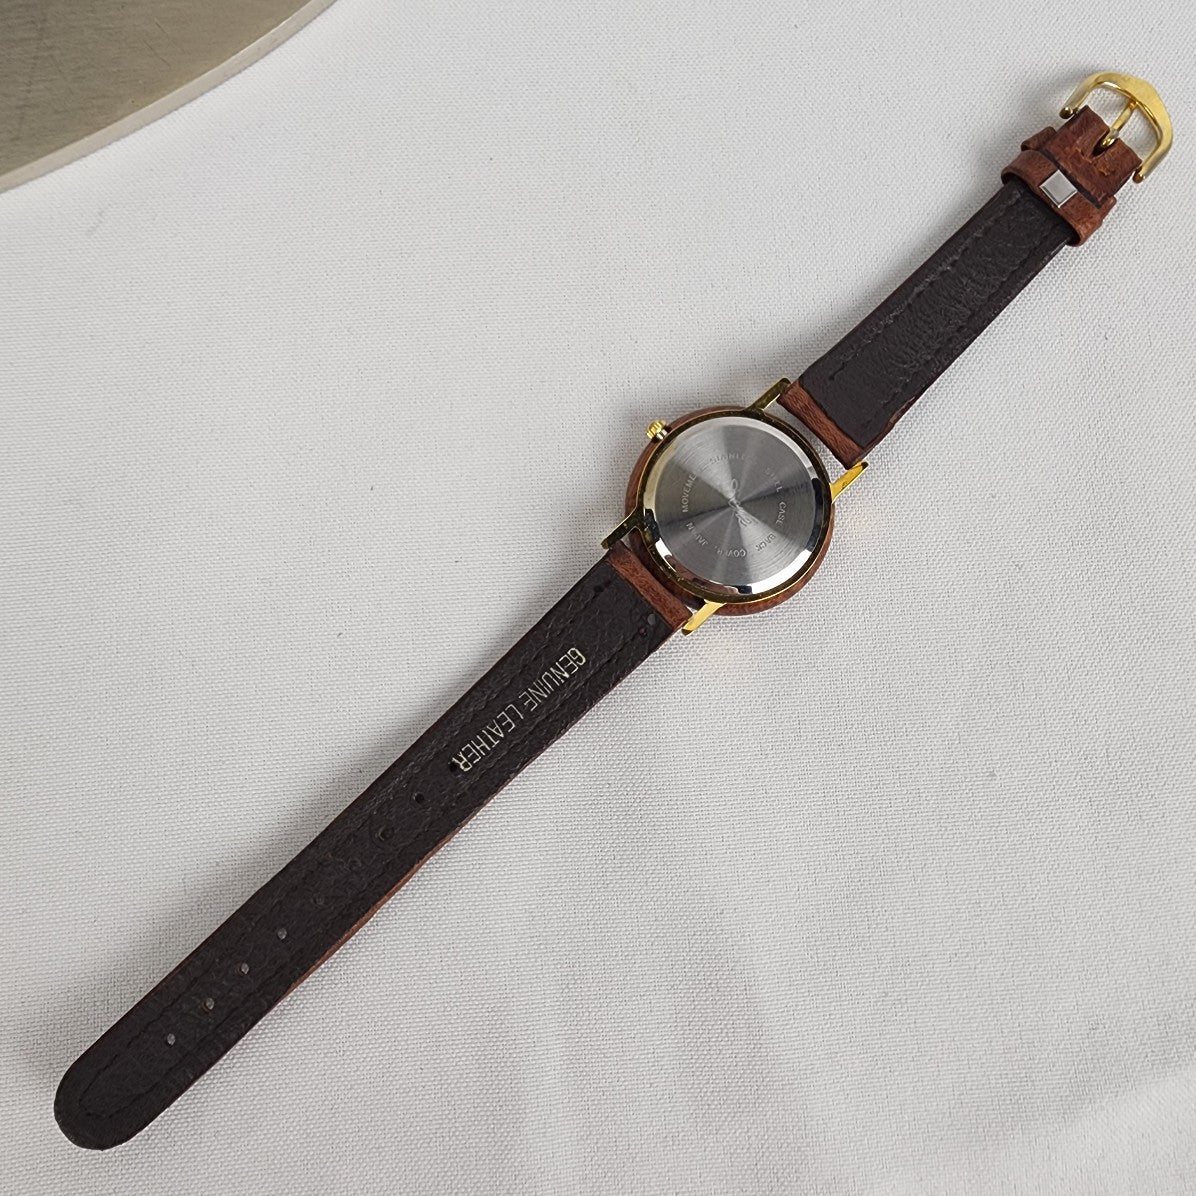 Dene Brown Leather Wood Face Watch